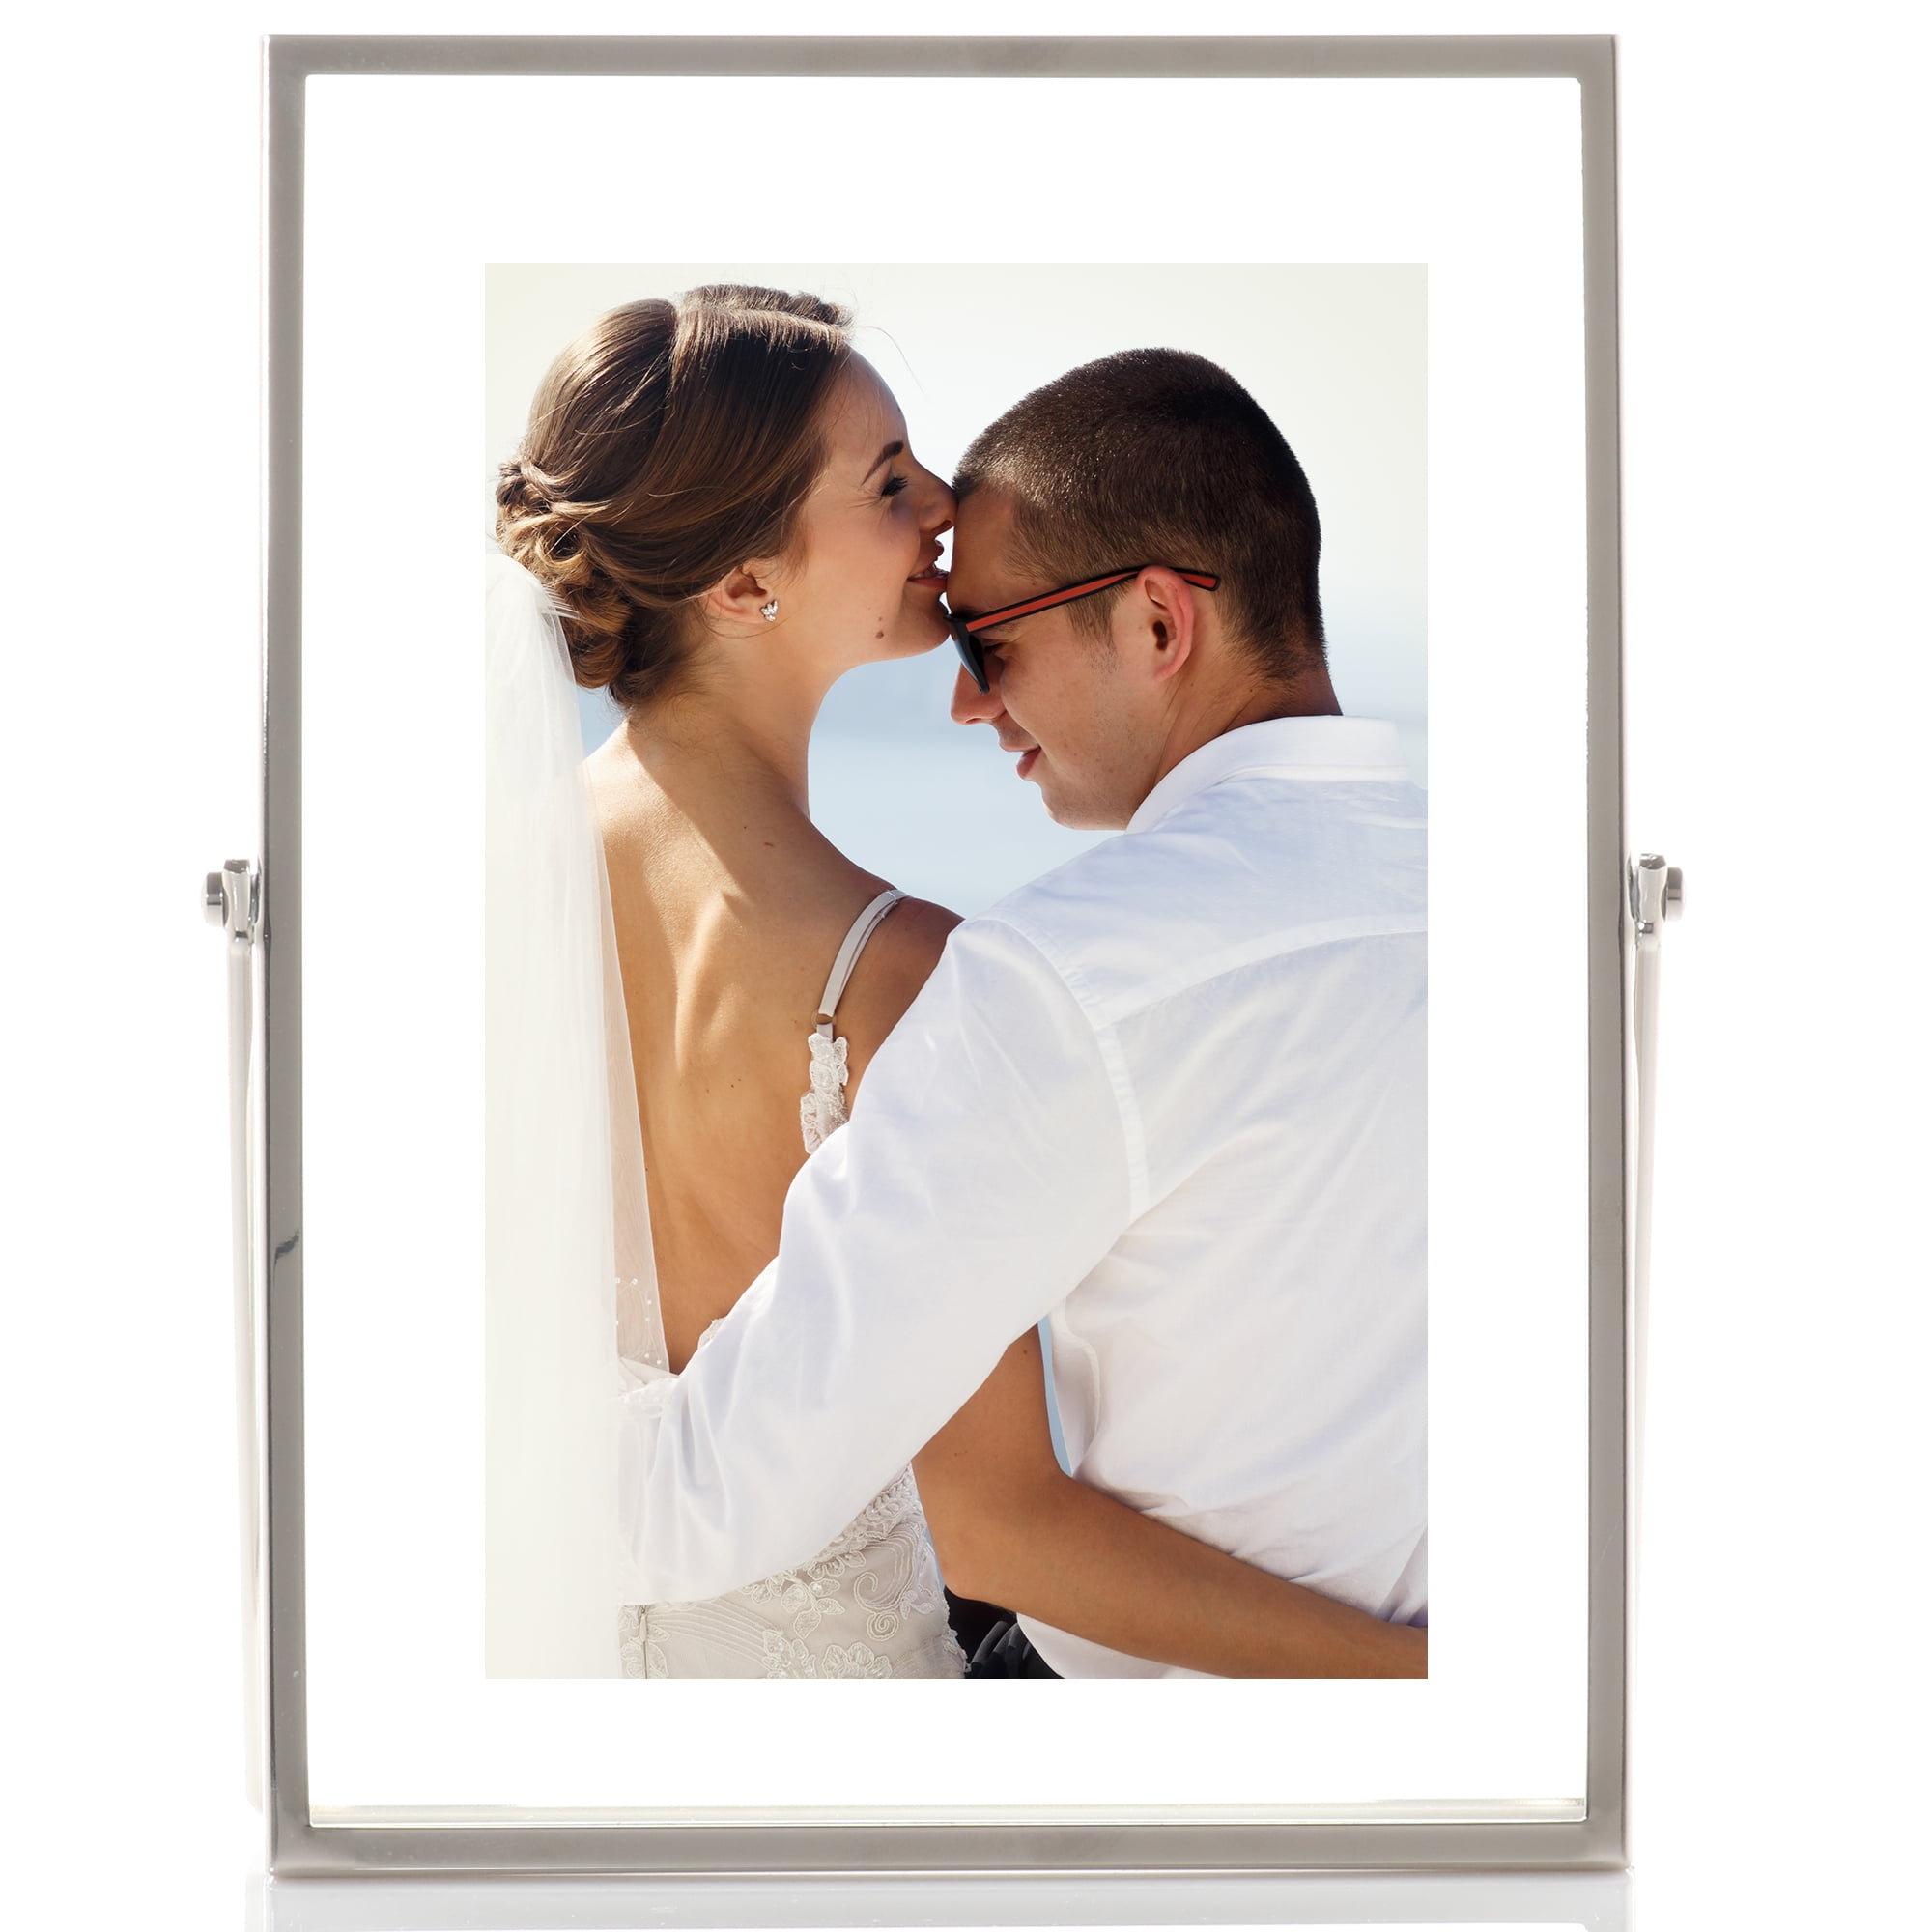 Floating 4 x 6 Photo Frame with Easel, 6 x 8 Inches, Mardel